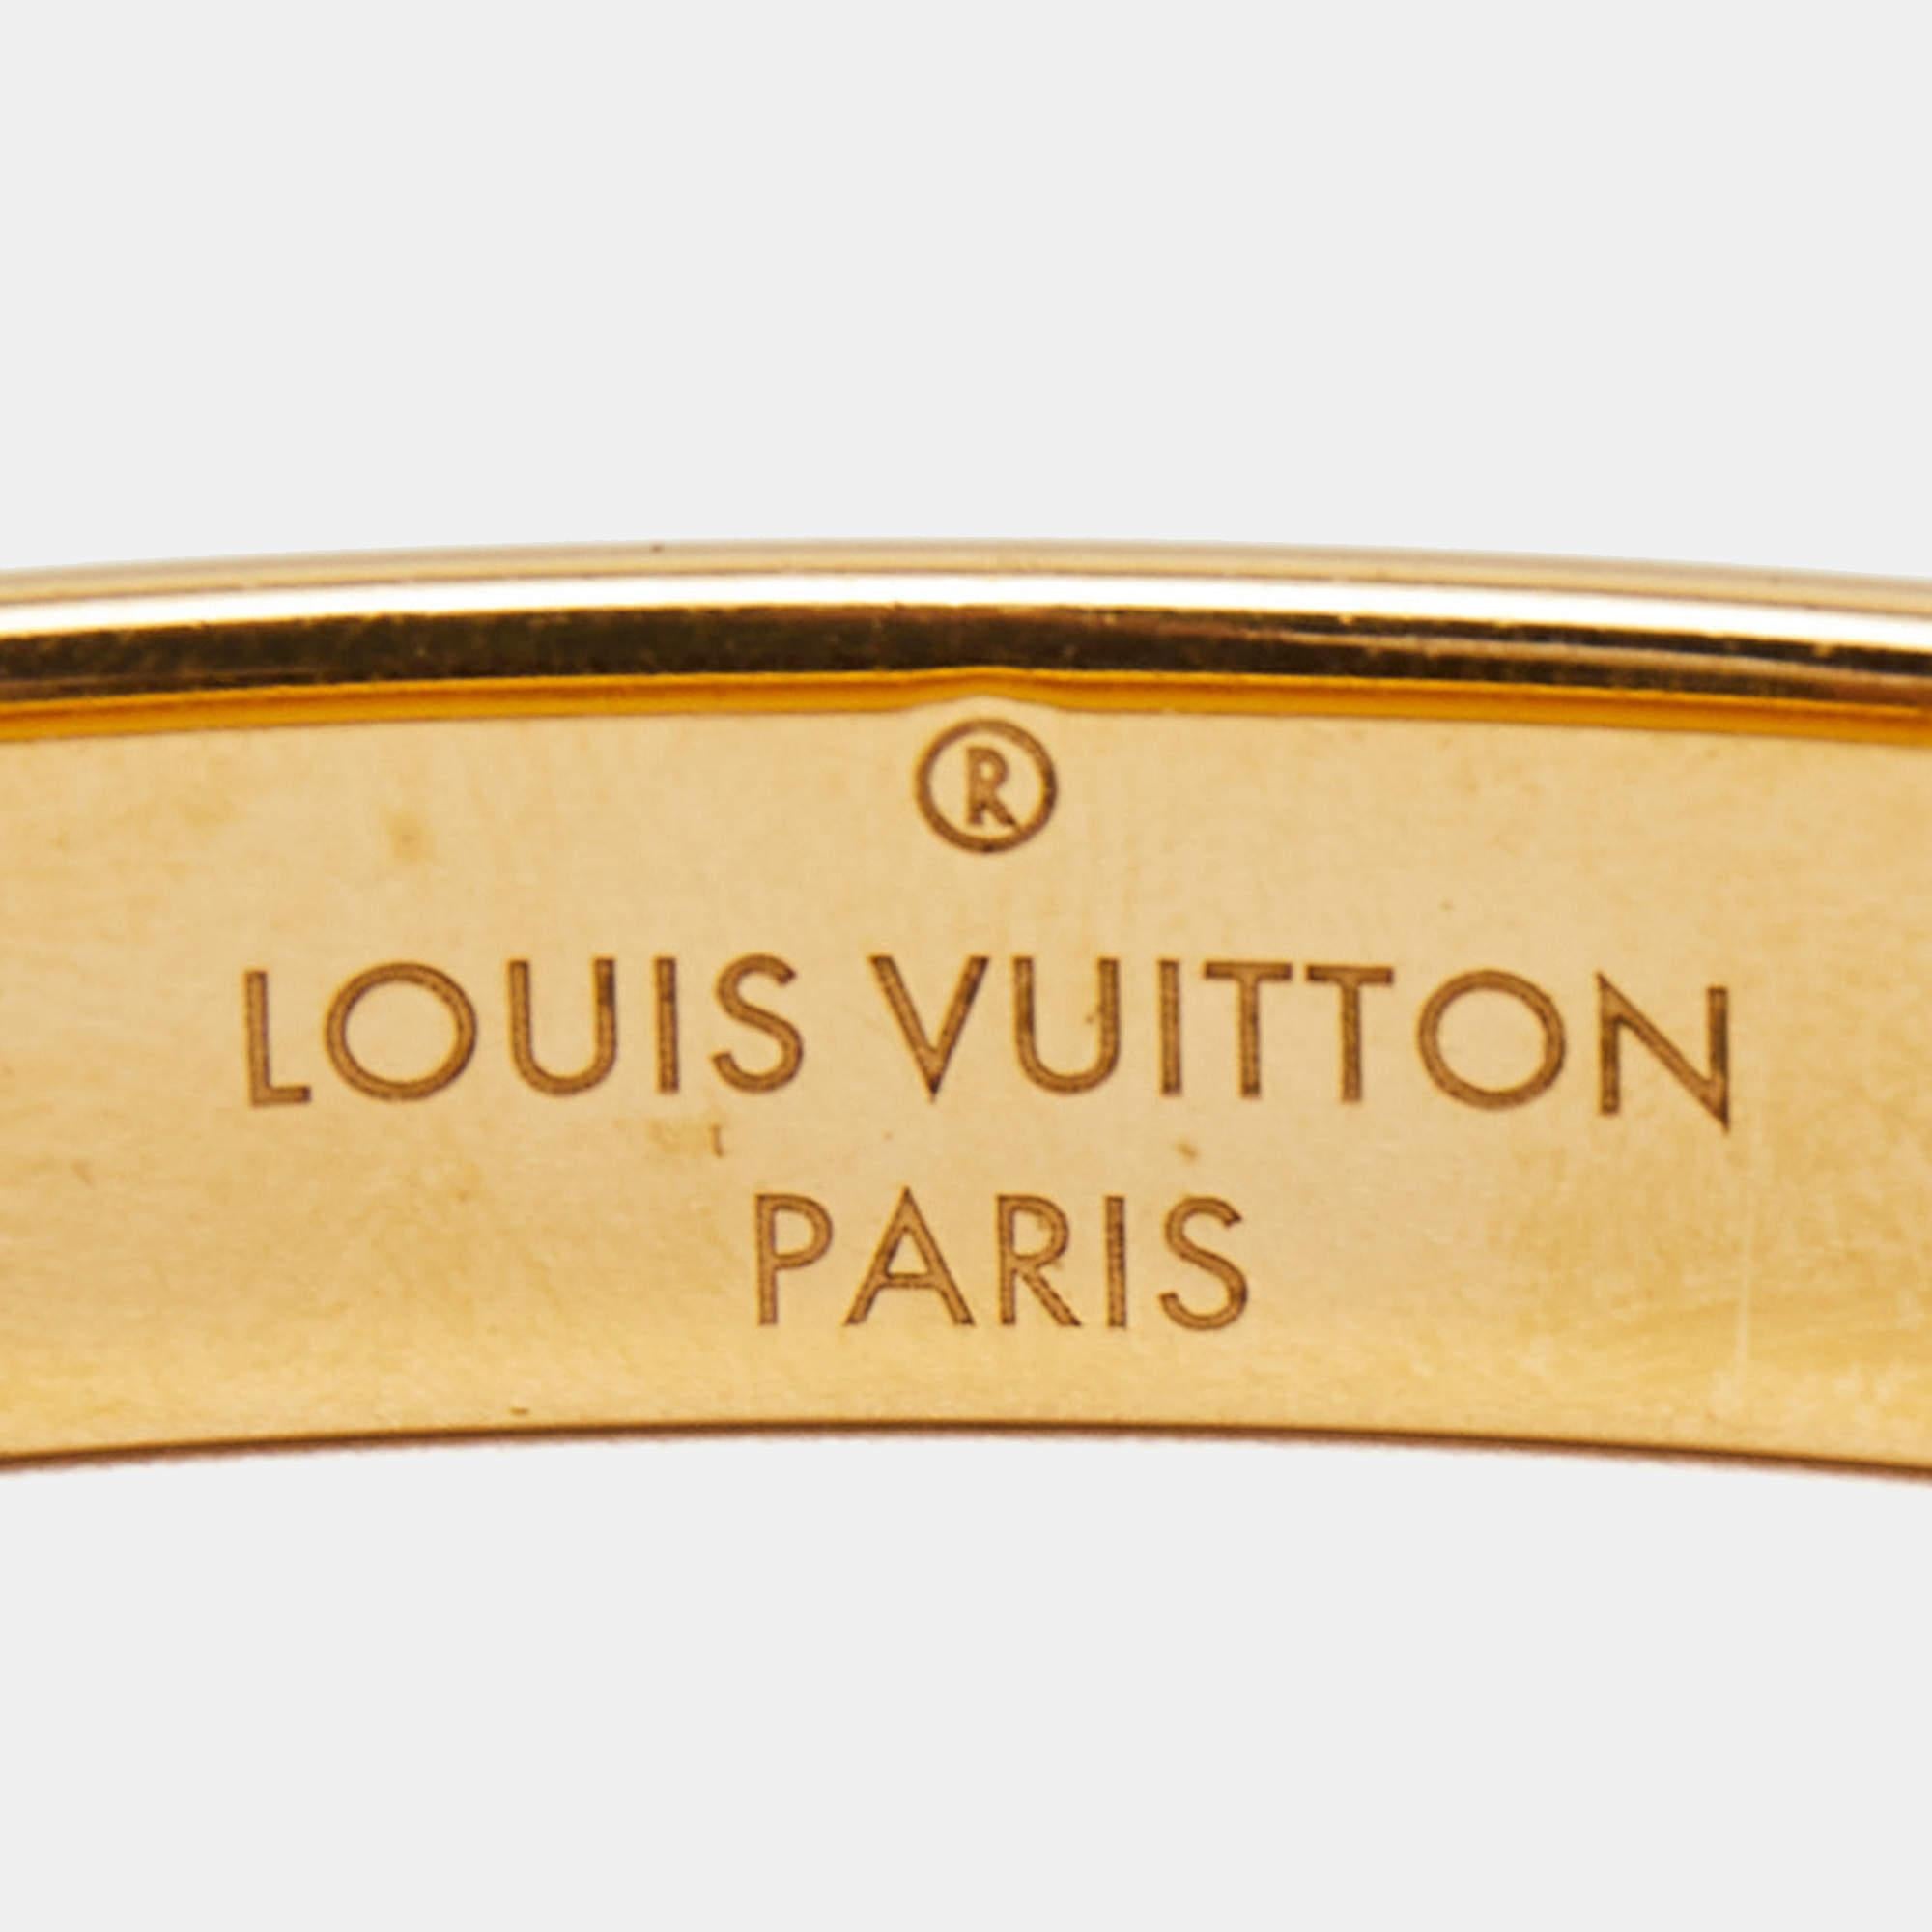 Bound to sit around your wrist and exude beauty, this Louis Vuitton is a great buy. It is made from two-toned metal and engraved with their signature motifs, a pattern well-known and loved by fashion lovers around the world. The bracelet has a